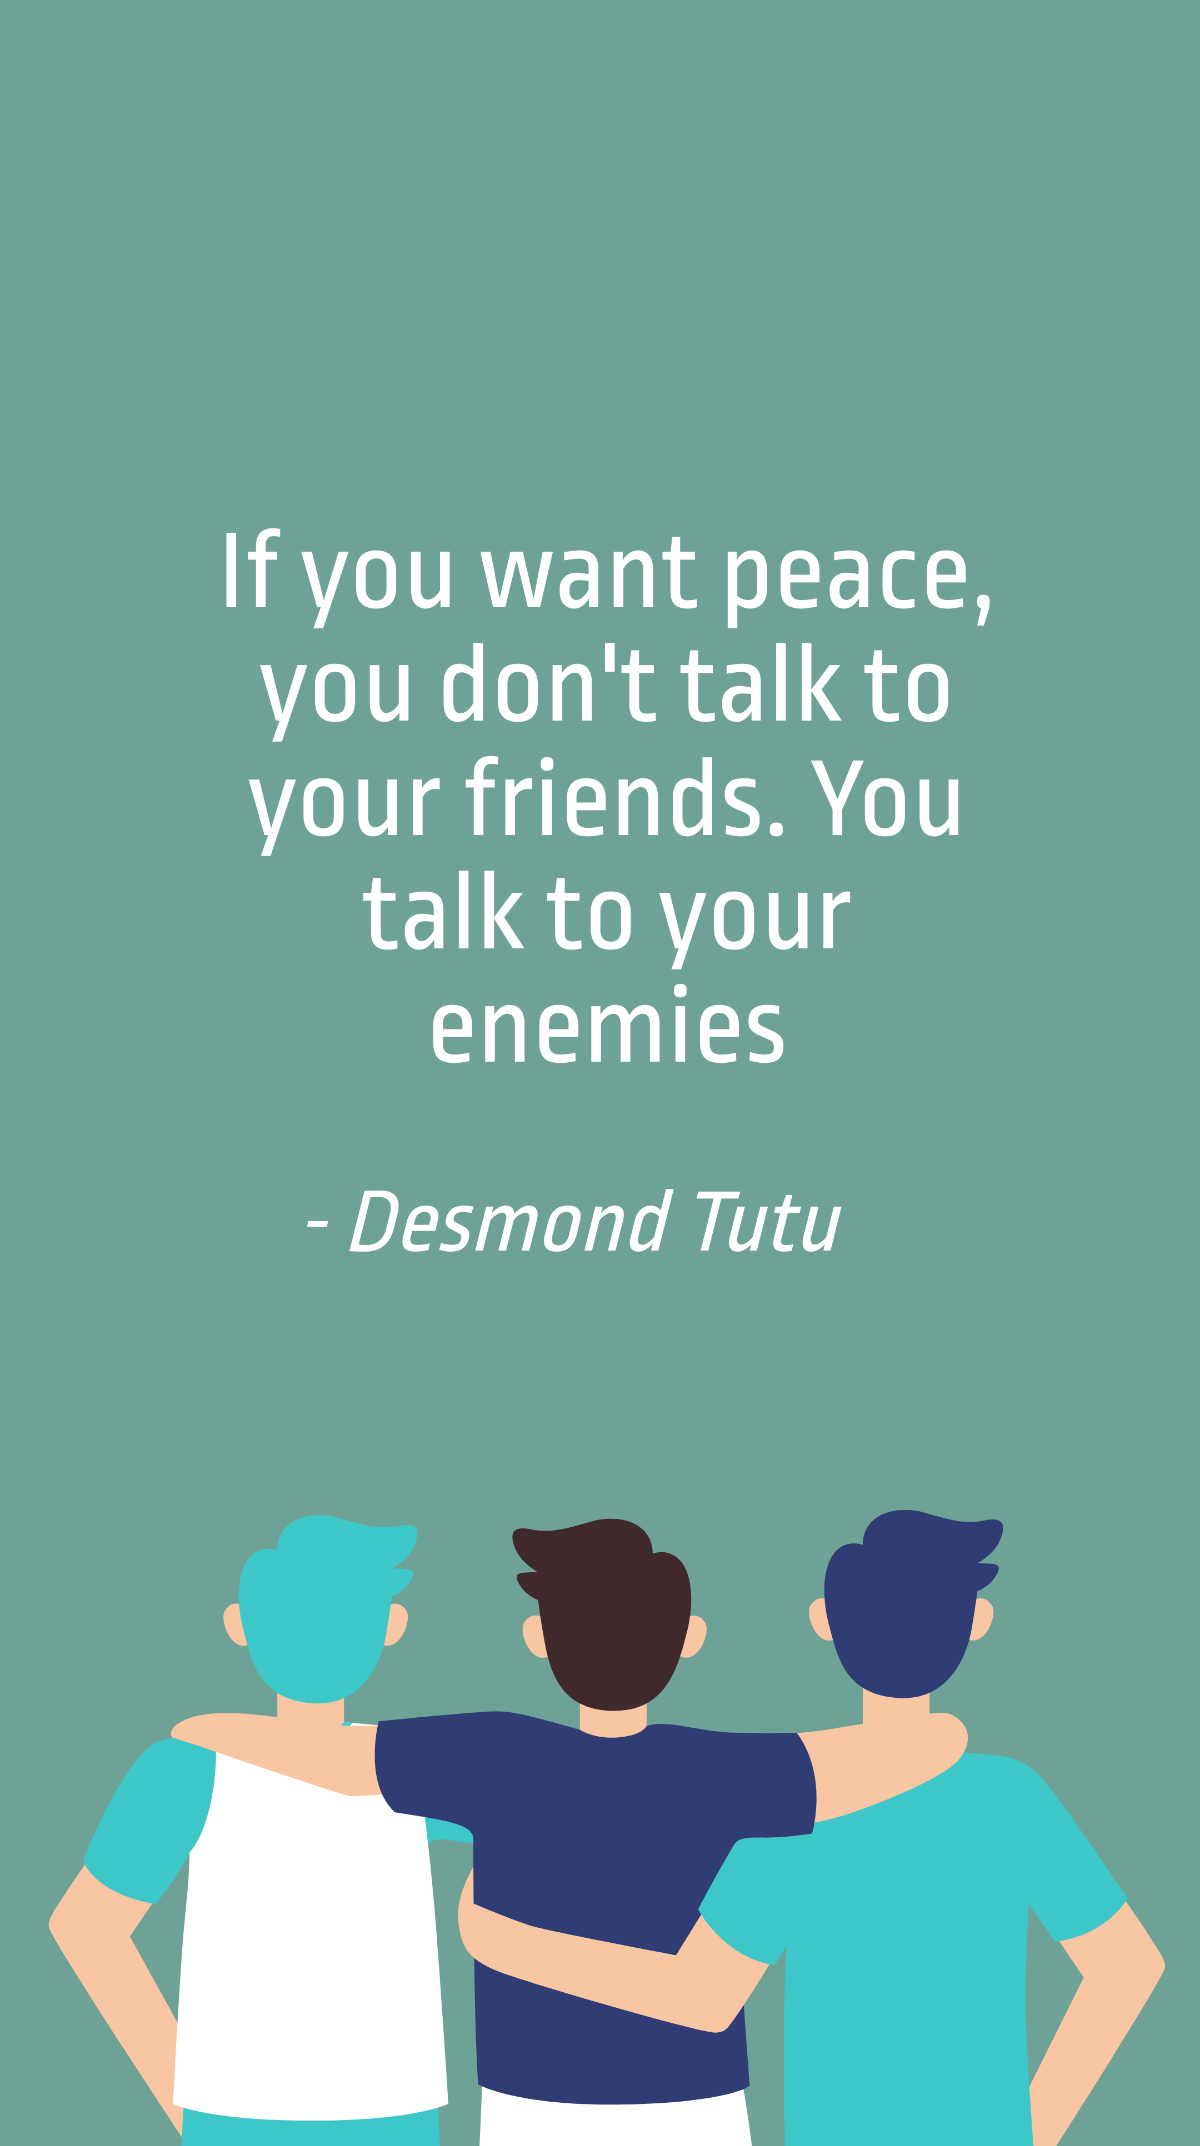 Desmond Tutu - If you want peace, you don't talk to your friends. You talk to your enemies Template